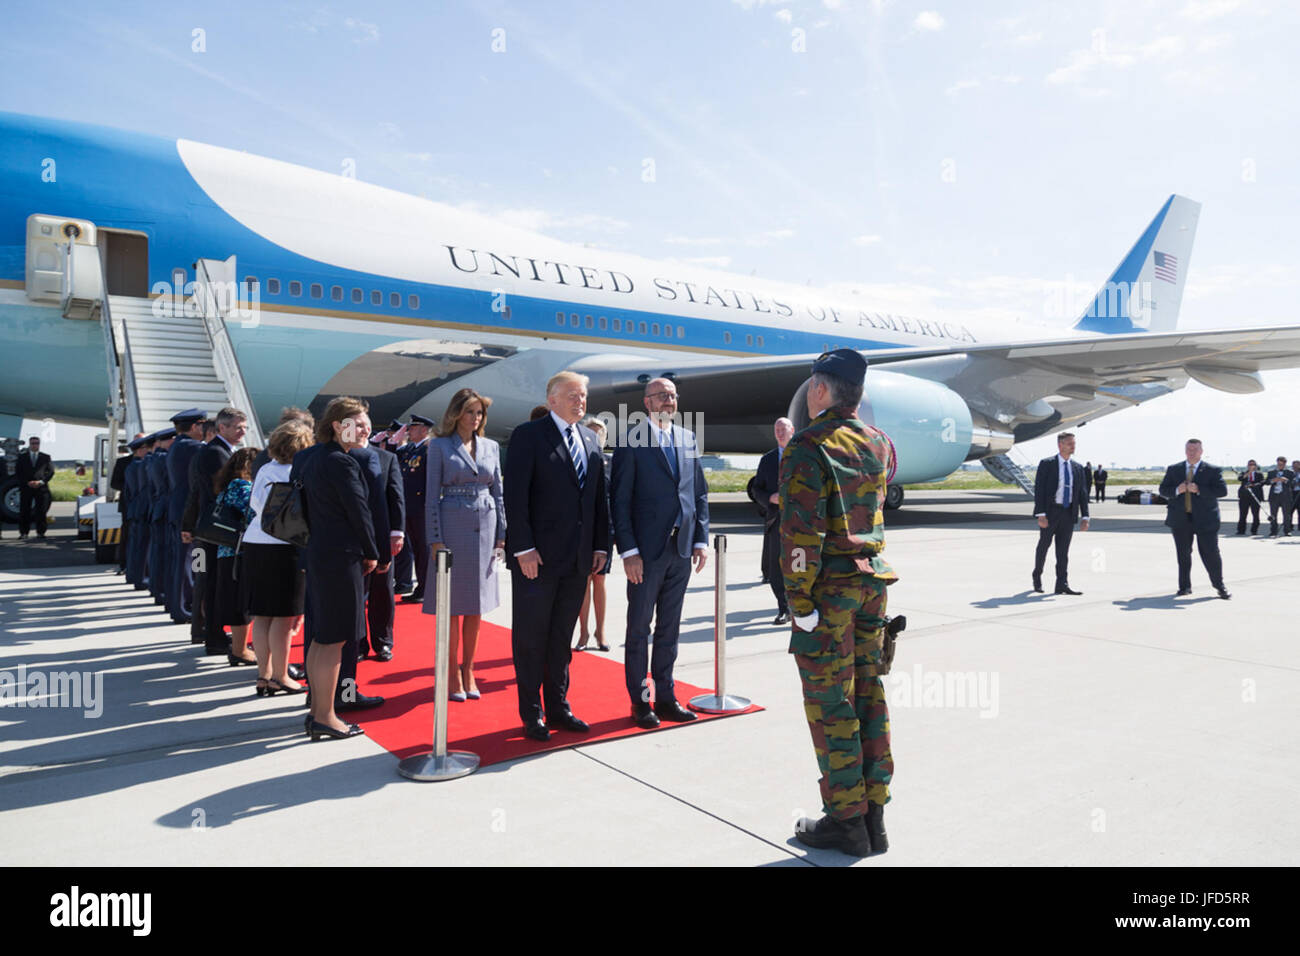 President Donald Trump and First Lady Melania Trump are welcomed by Belgium Prime Minister Charles Michel, and his wife, Amélie Derbaudrenghien, on their arrival to Brussels International Airport in Brussels, Belgium. (Official White House Photo by Shealah Craighead) Stock Photo